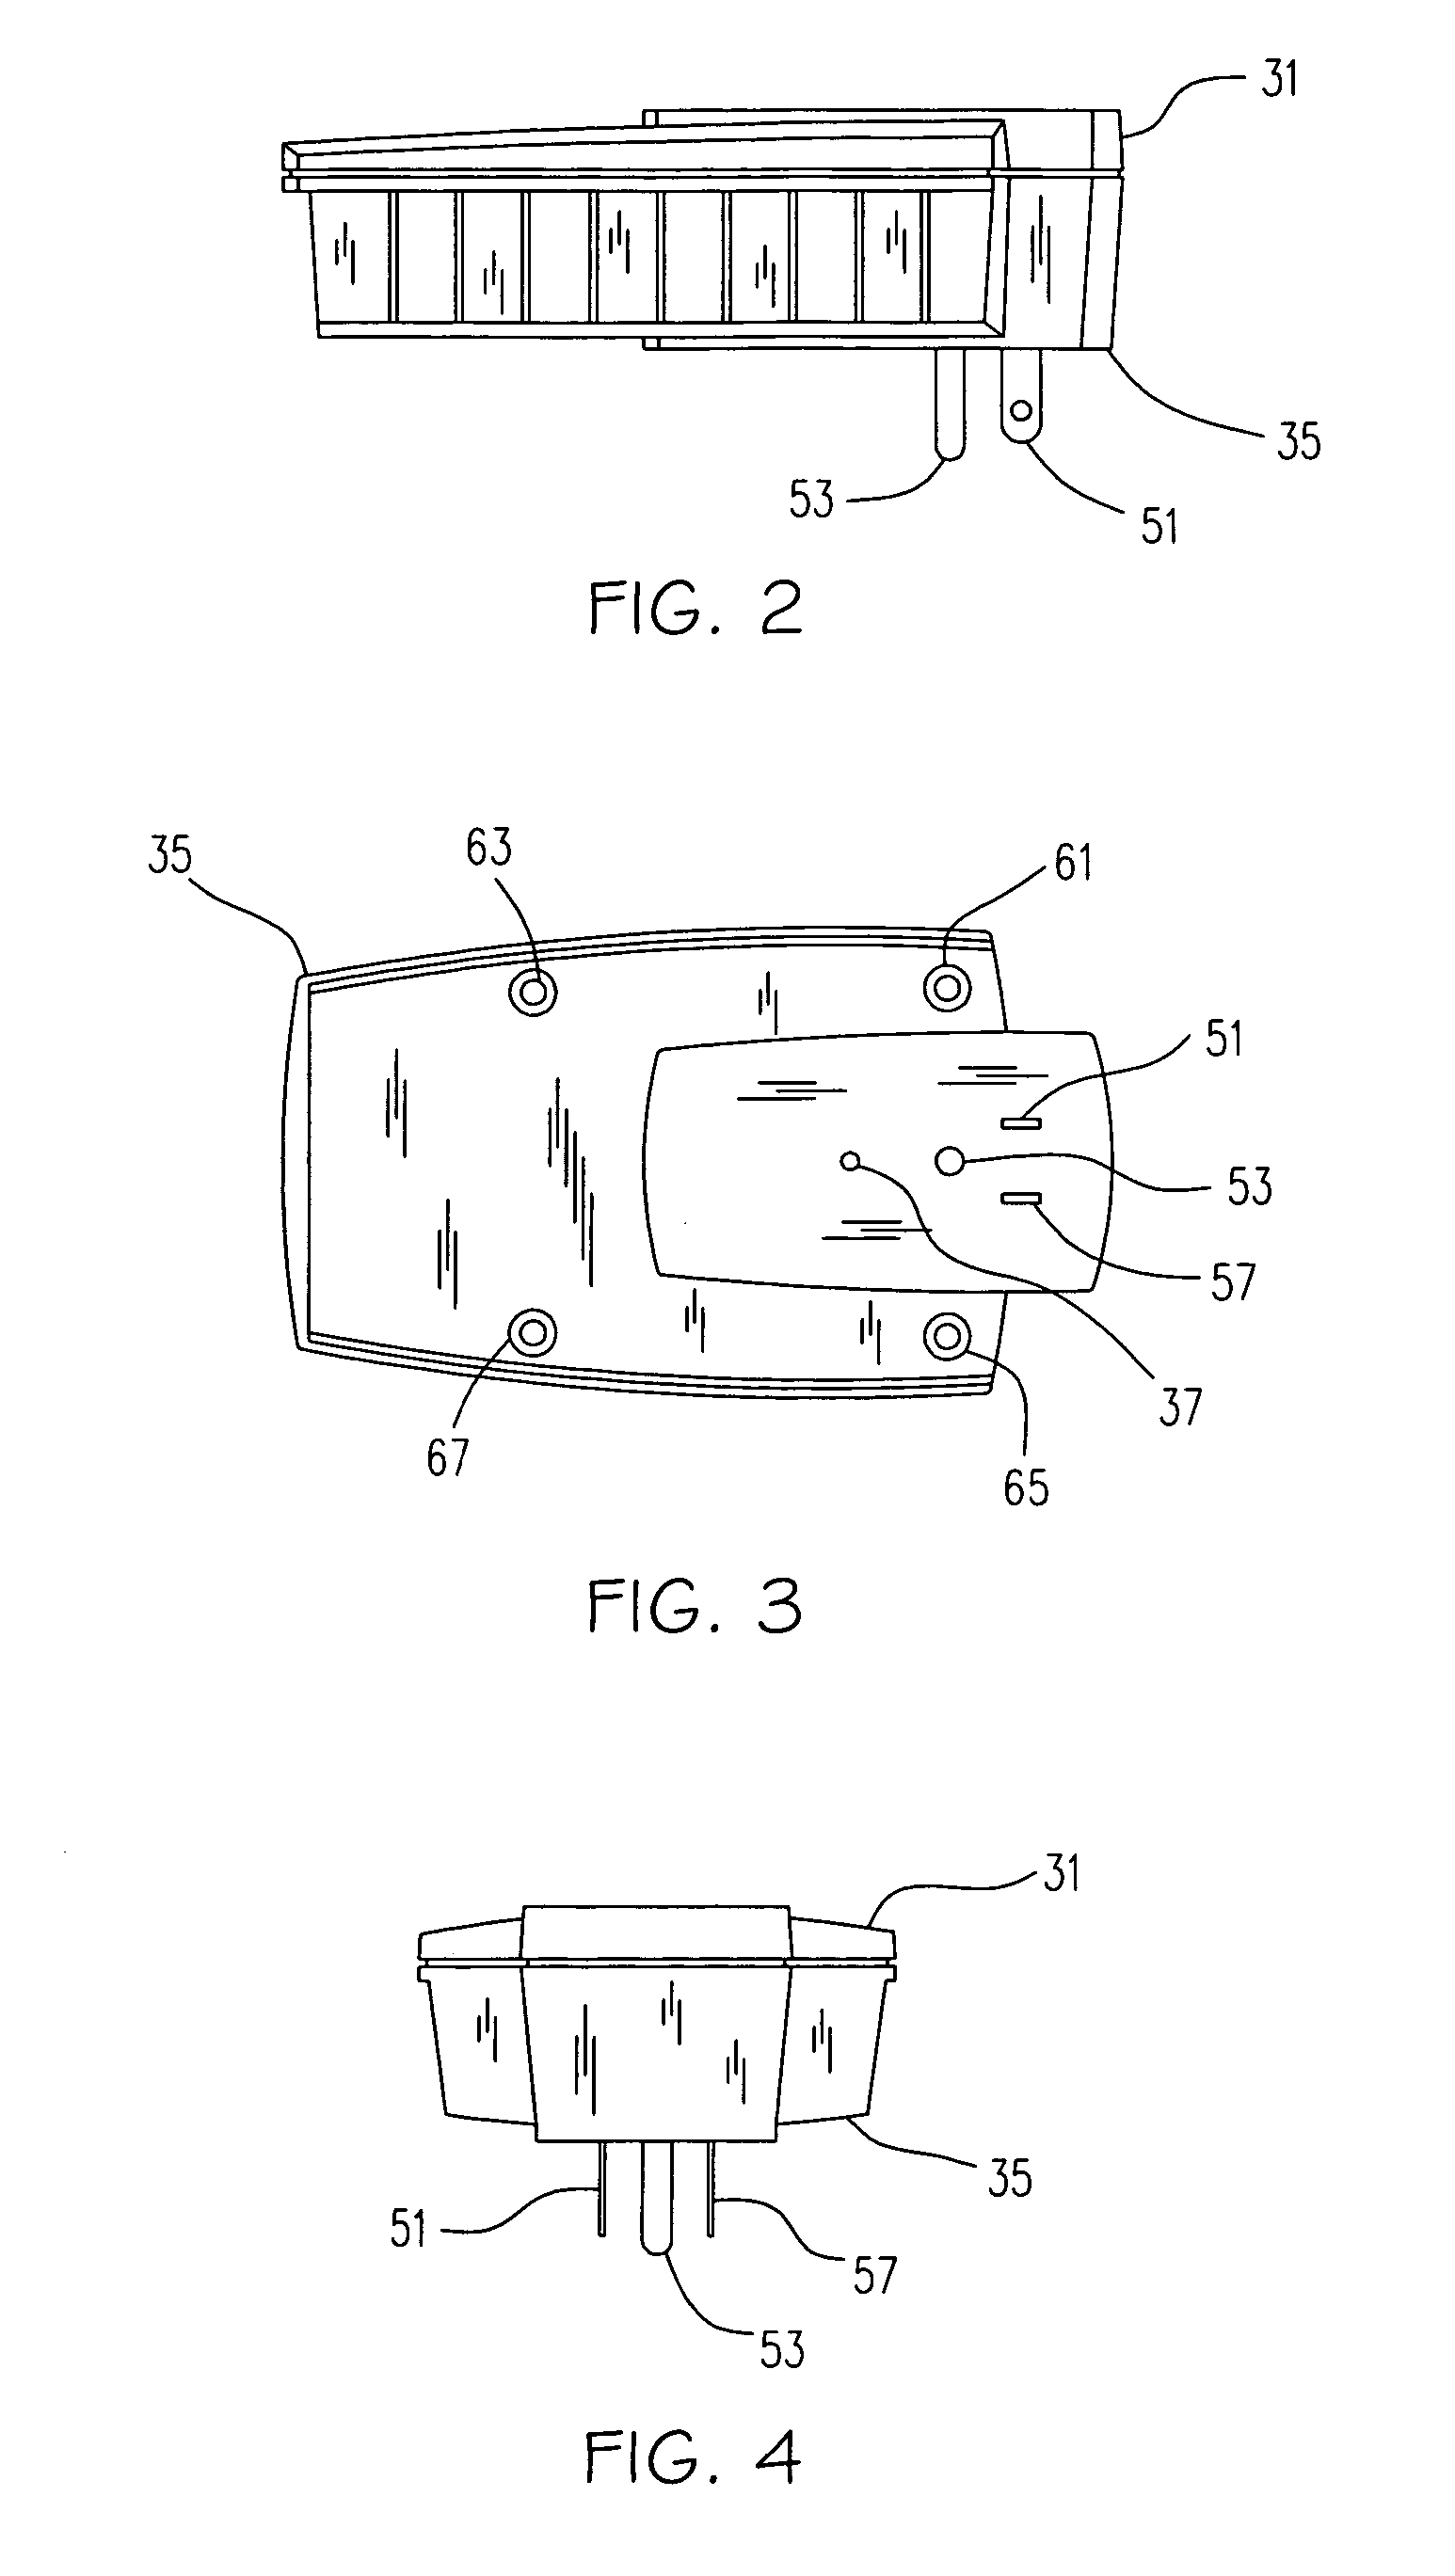 Alternating current power strip with network repeating and management